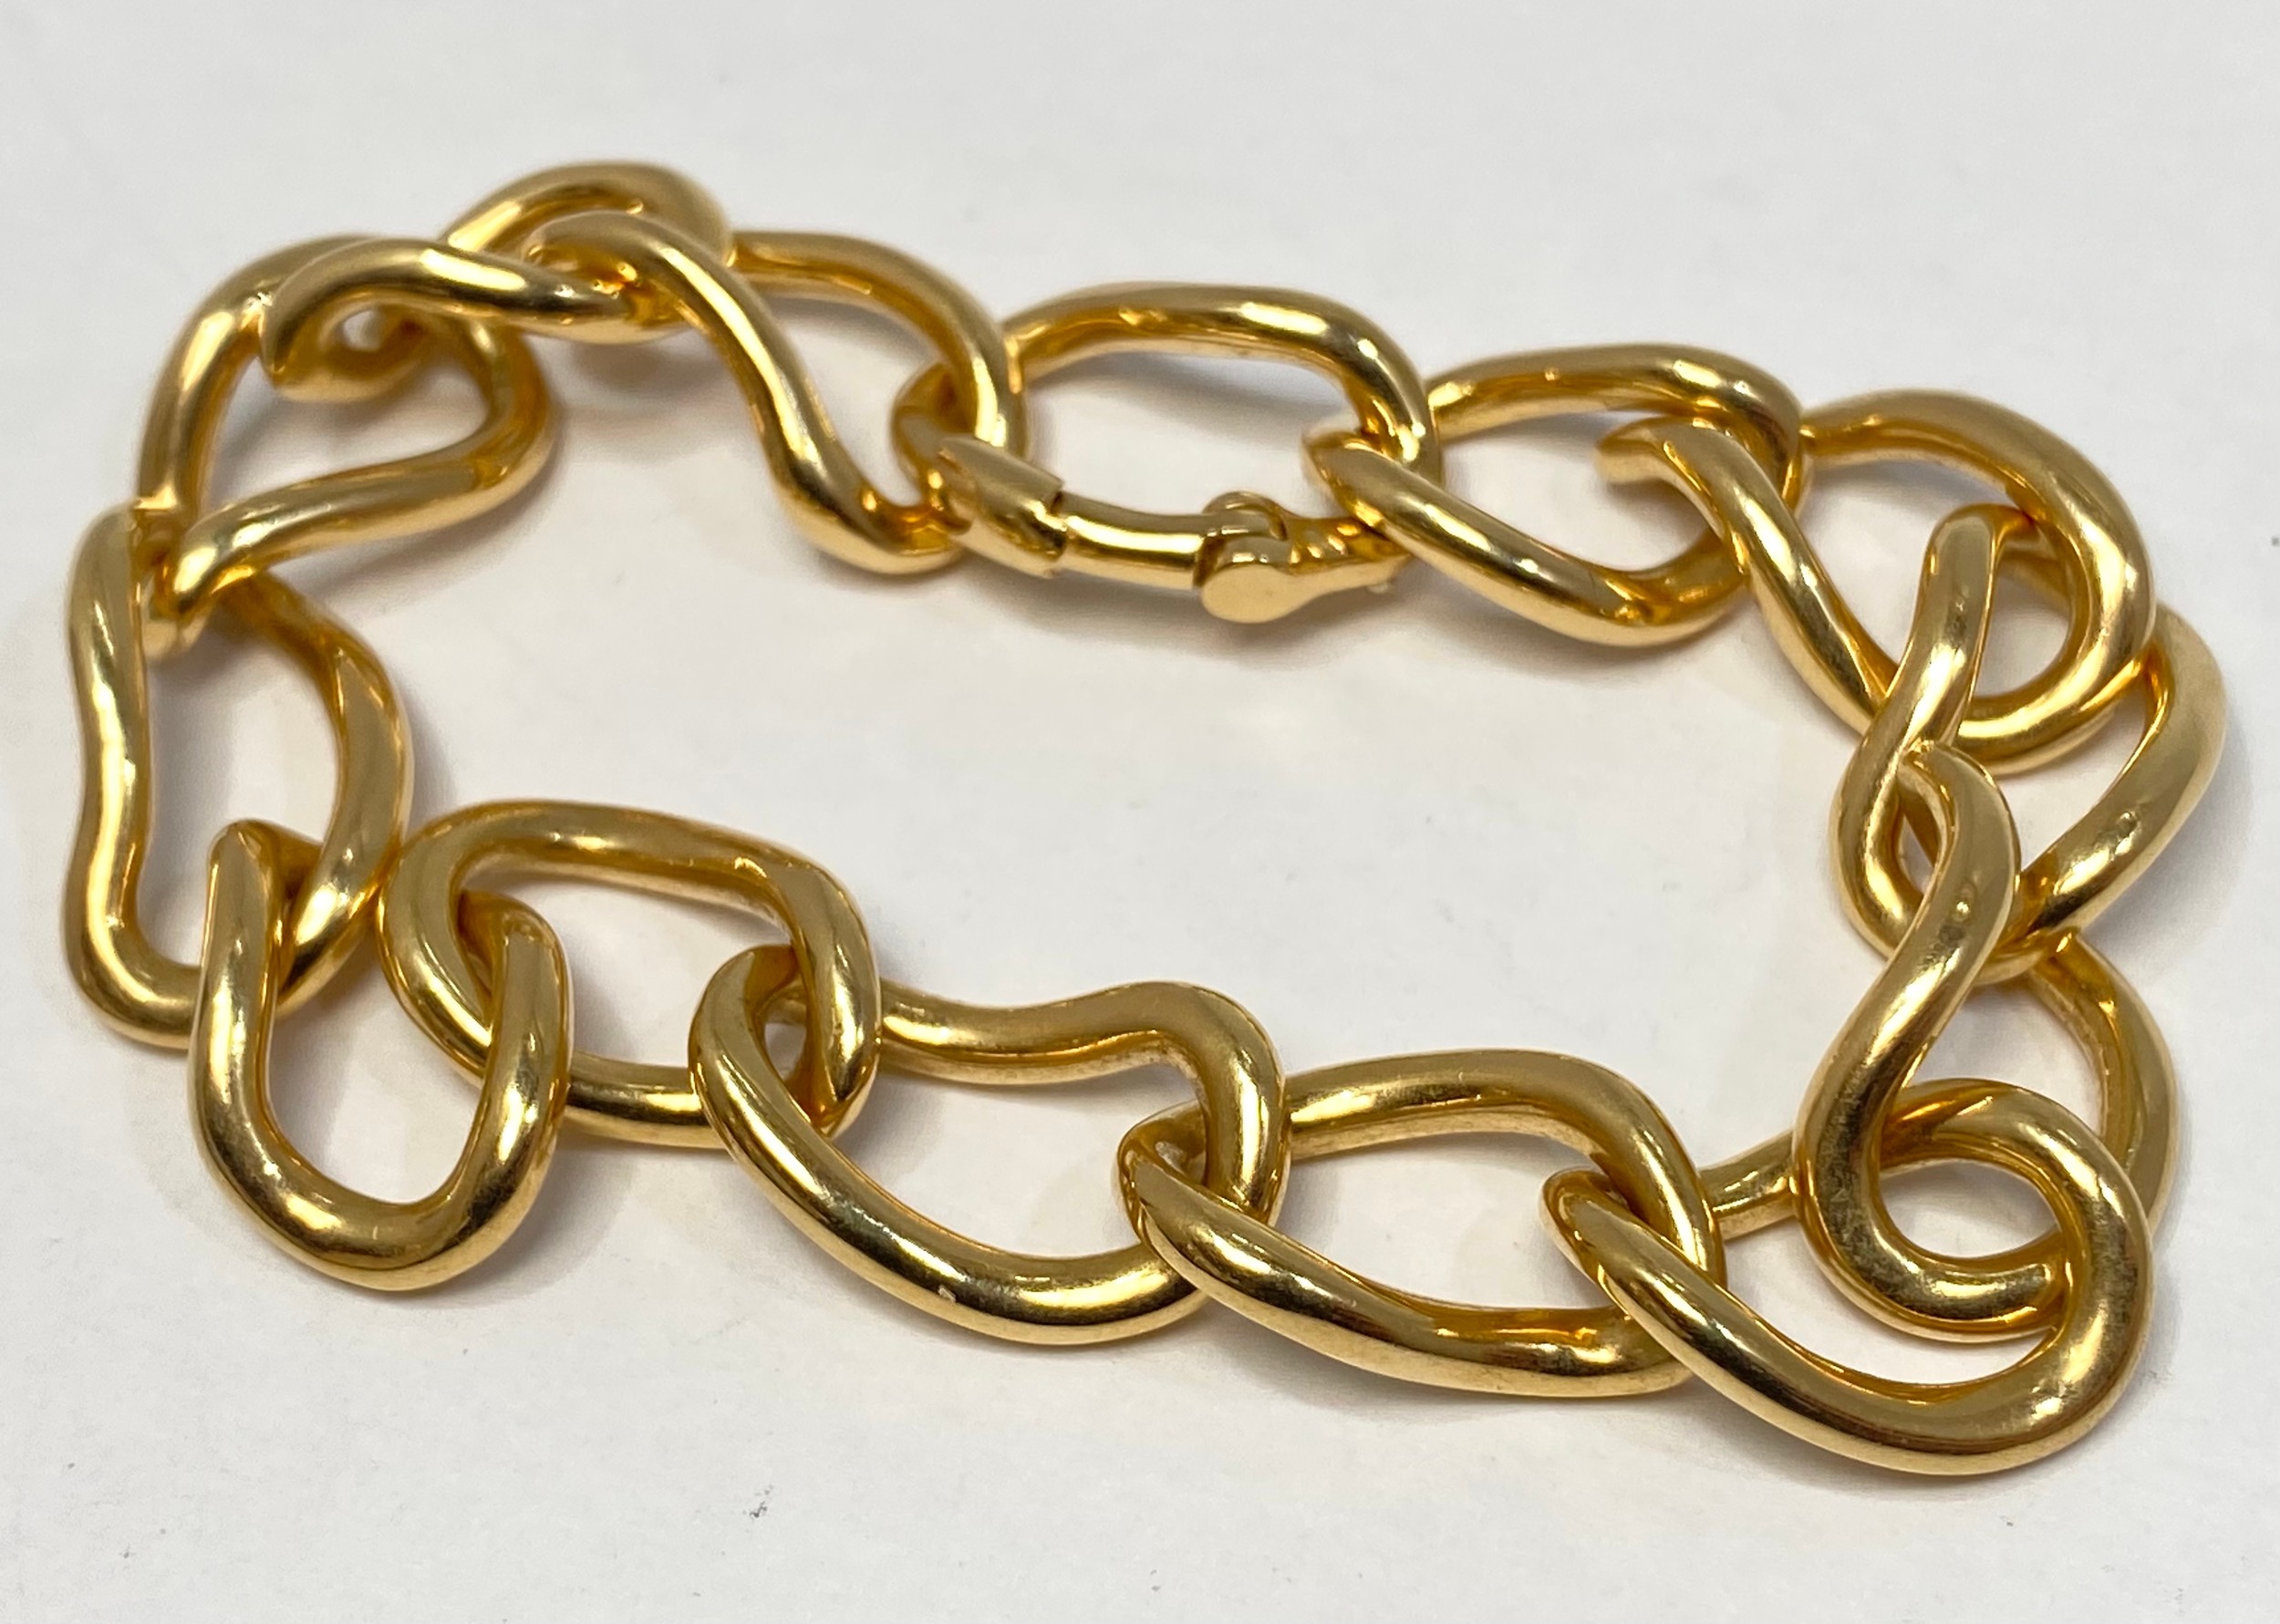 An 18ct gold bracelet of interlocked curved links, with hidden clasp fastening, weighing 38.4 grams.